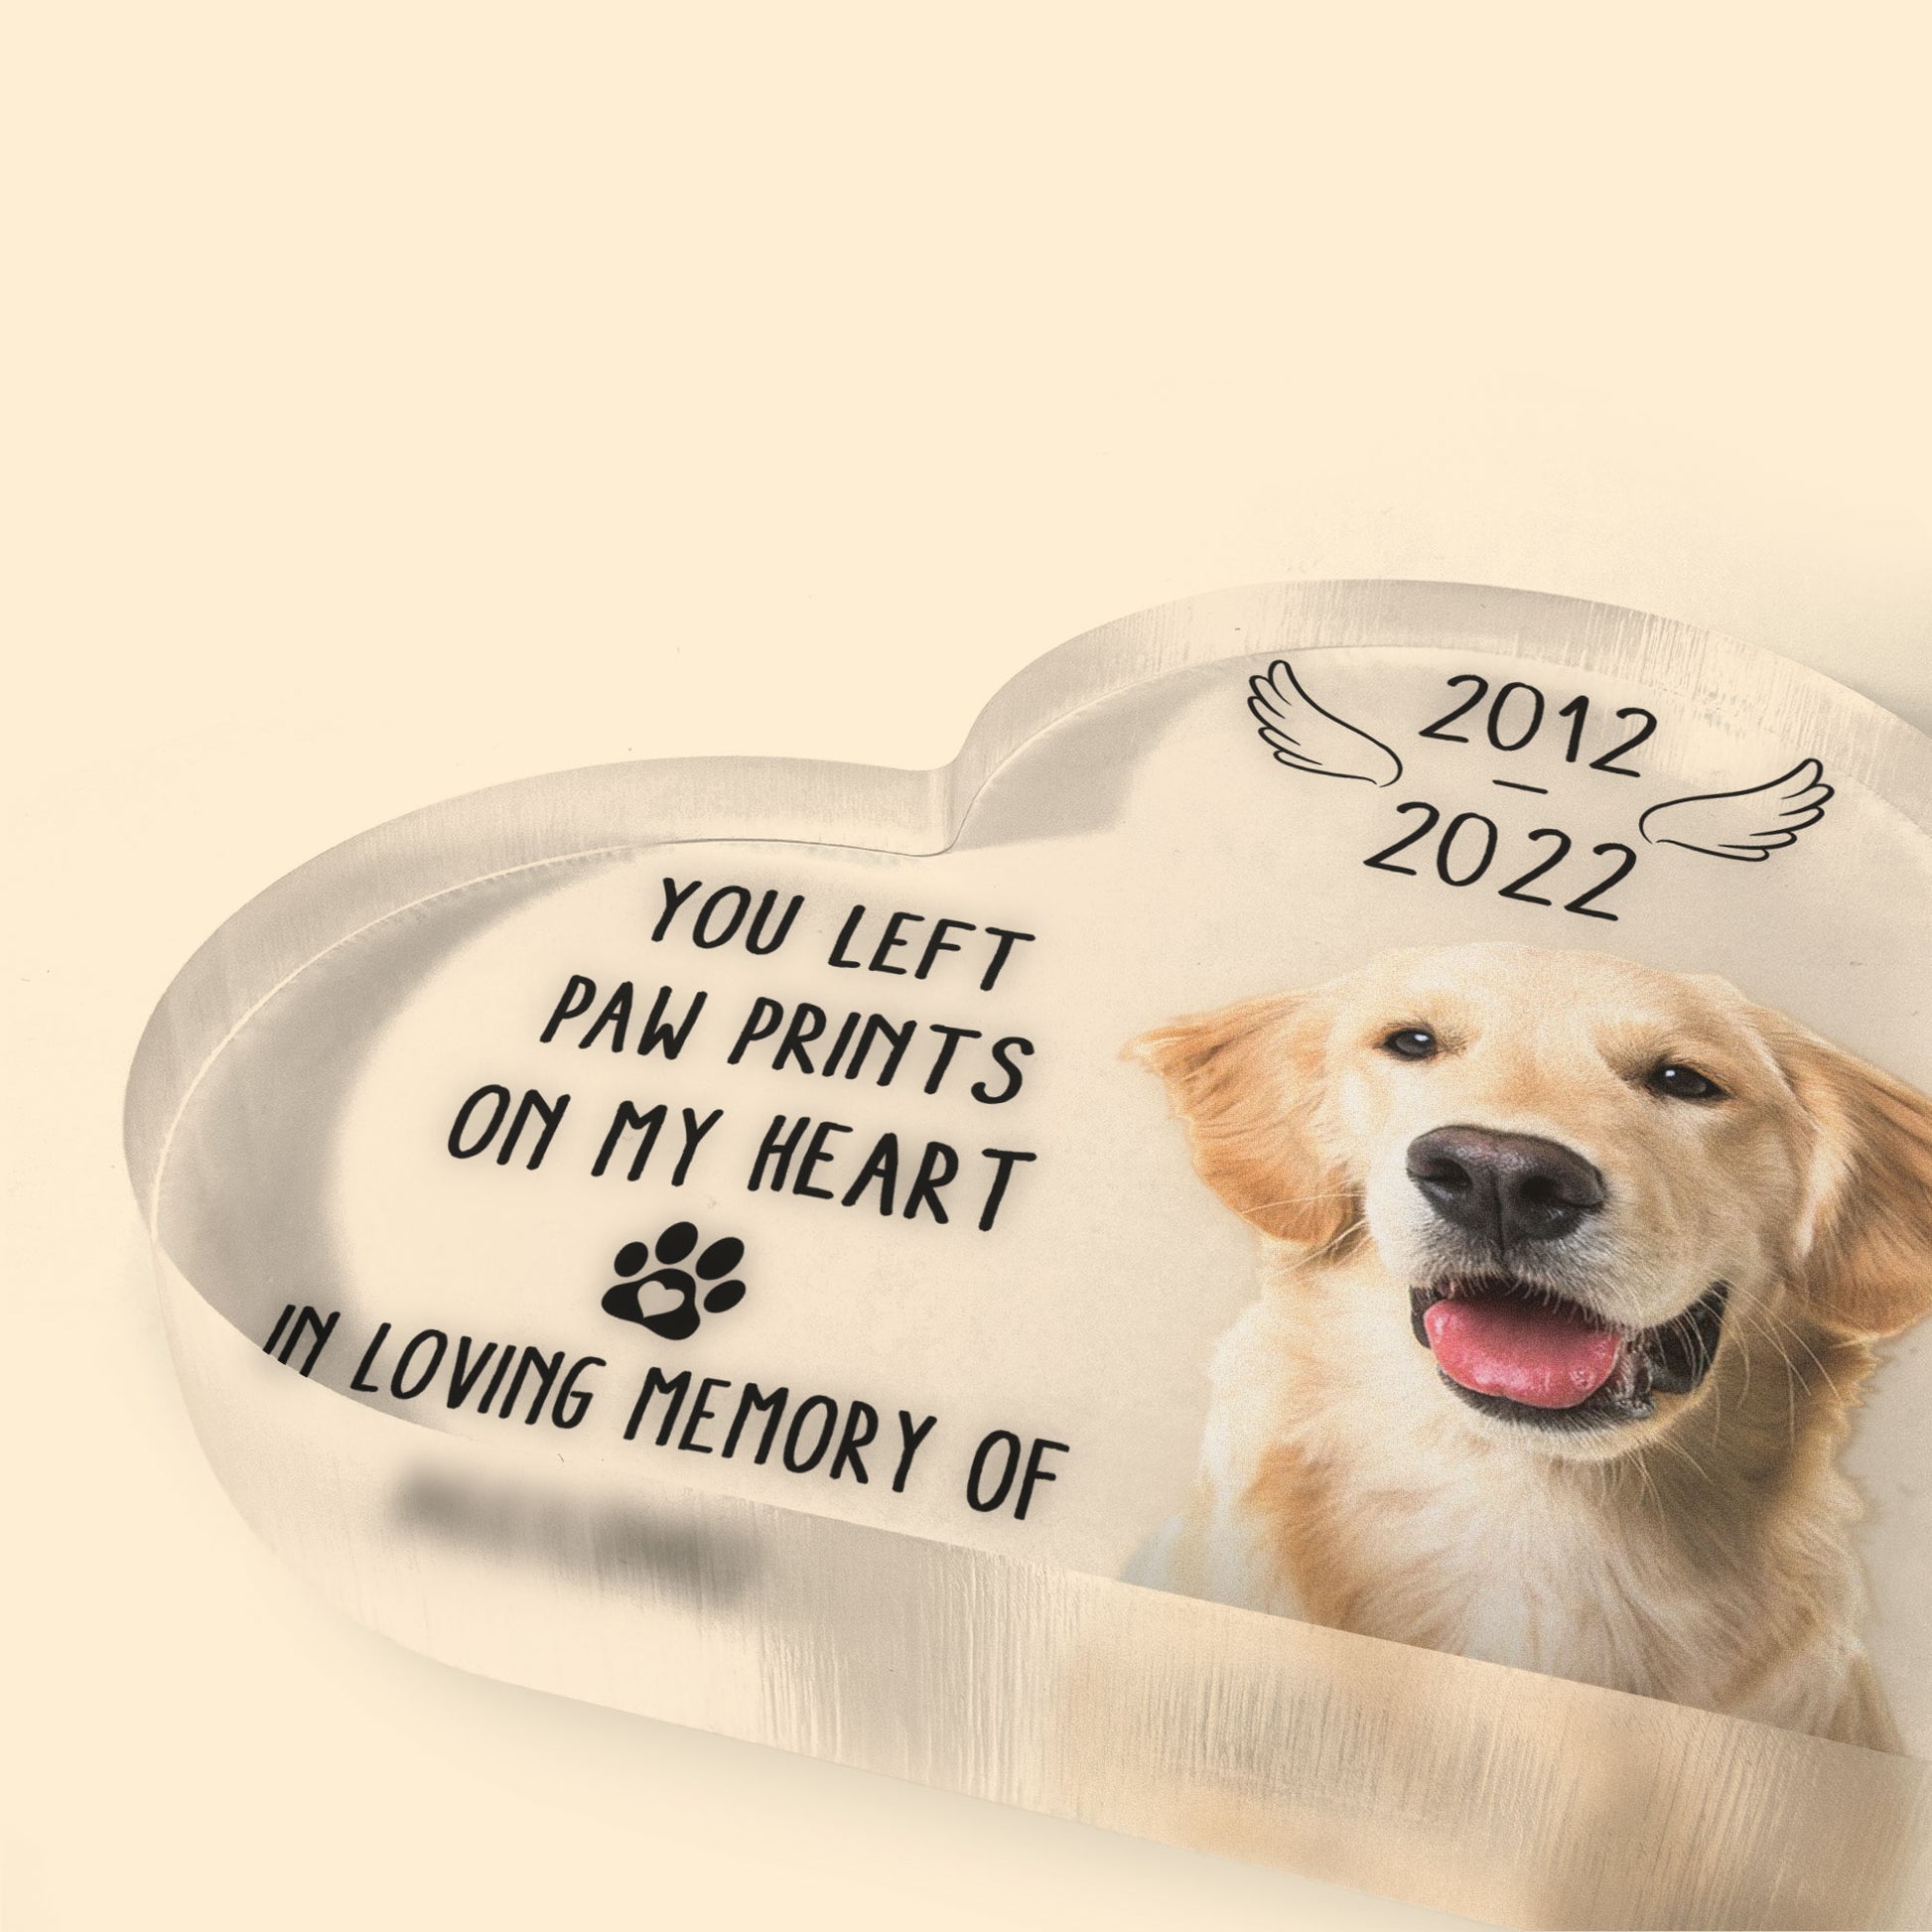 You Left Paw Prints On My Heart - Personalized Heart Shaped Acrylic Plaque - Memorial, Loving Gift For Pet Loss Owners, Pet Lovers